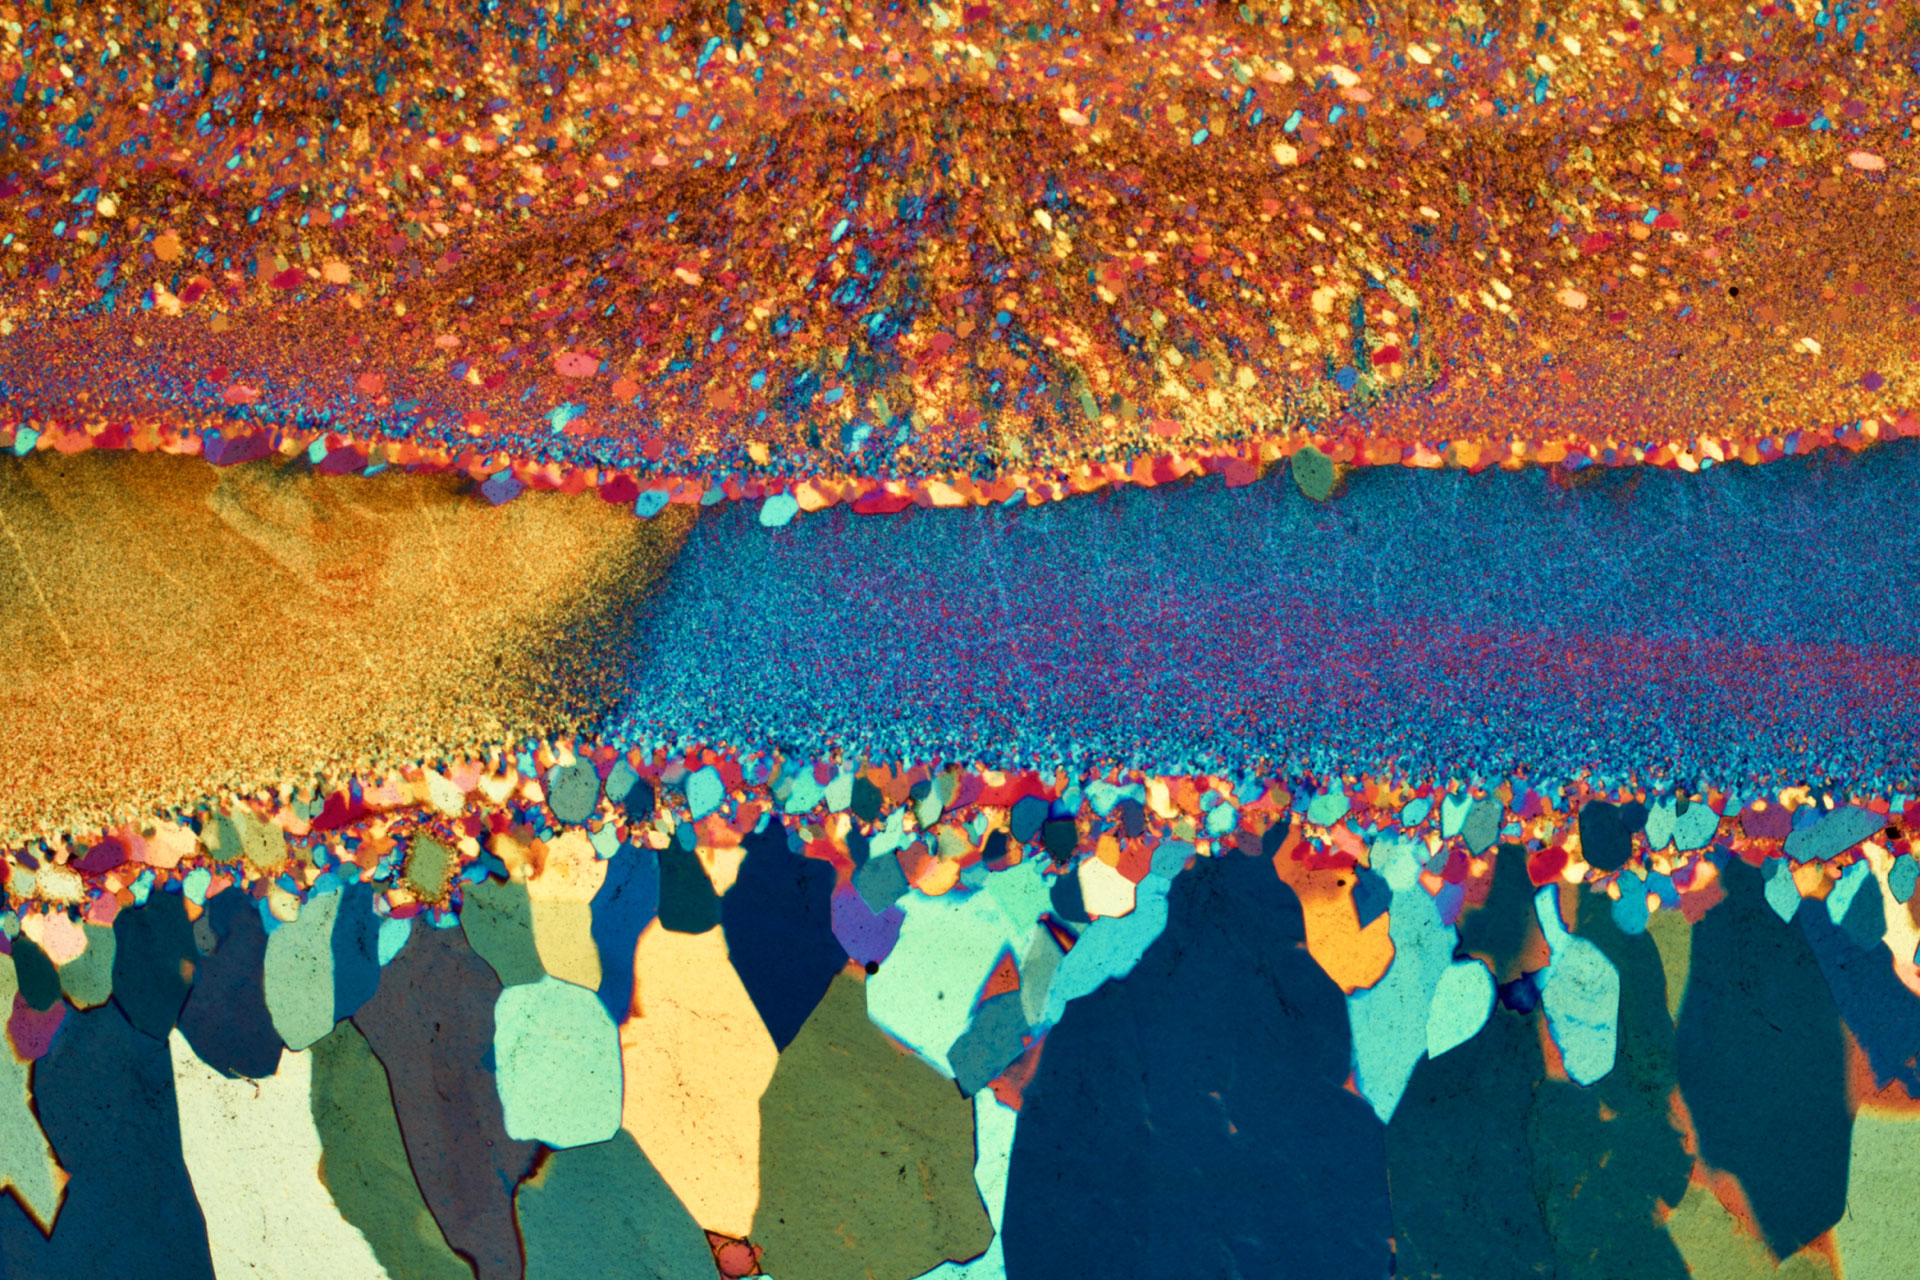 3rd place: Thin section of an agate from Brazil, acquired with a ZEISS Axioscope light microscope